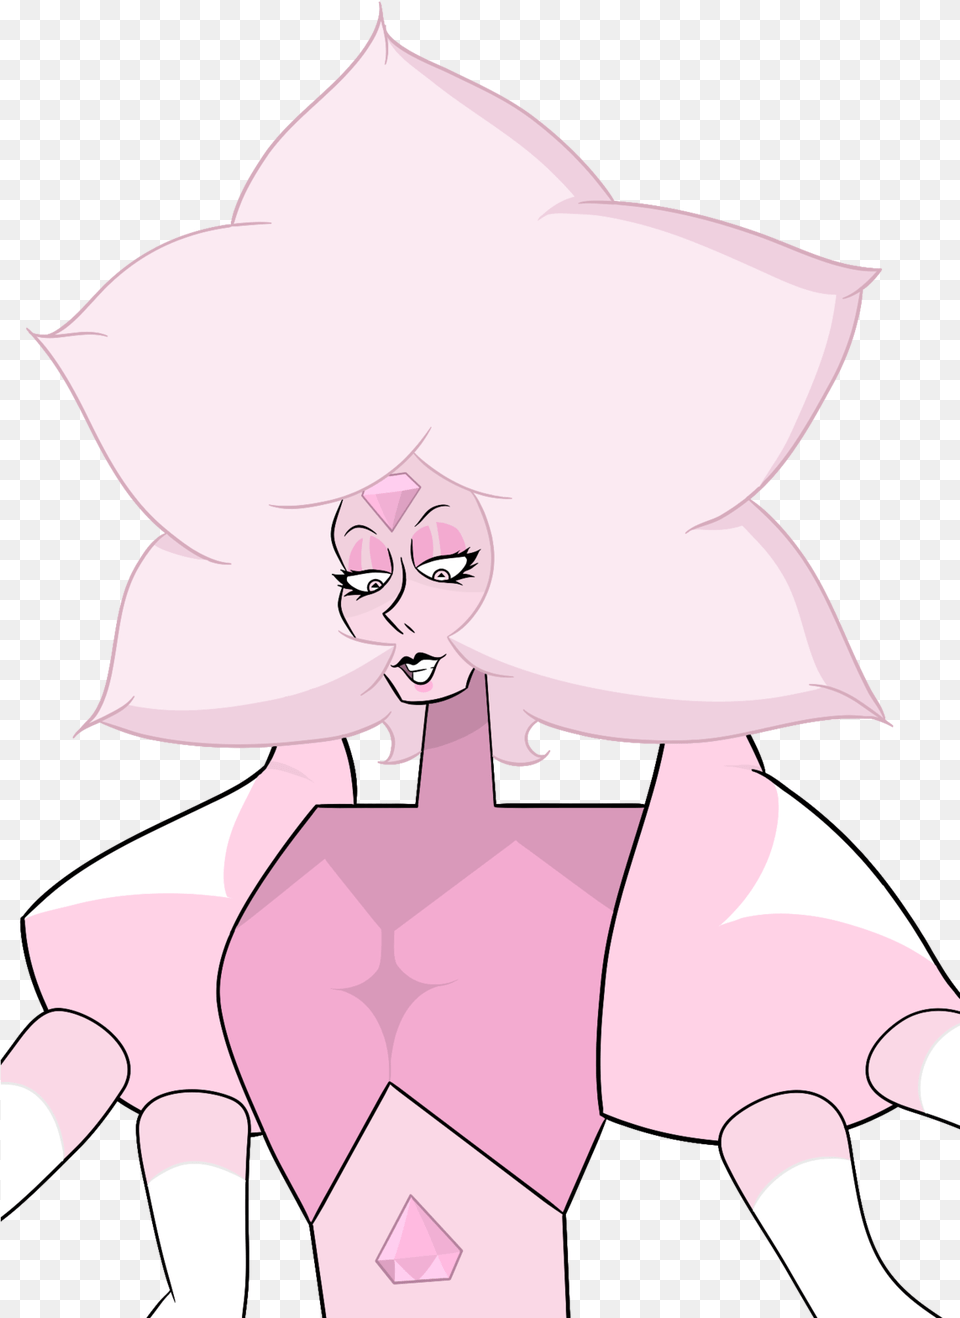 Felt Inspired To Make My Own White And Pink Fusion Cartoon, Publication, Book, Comics, Baby Png